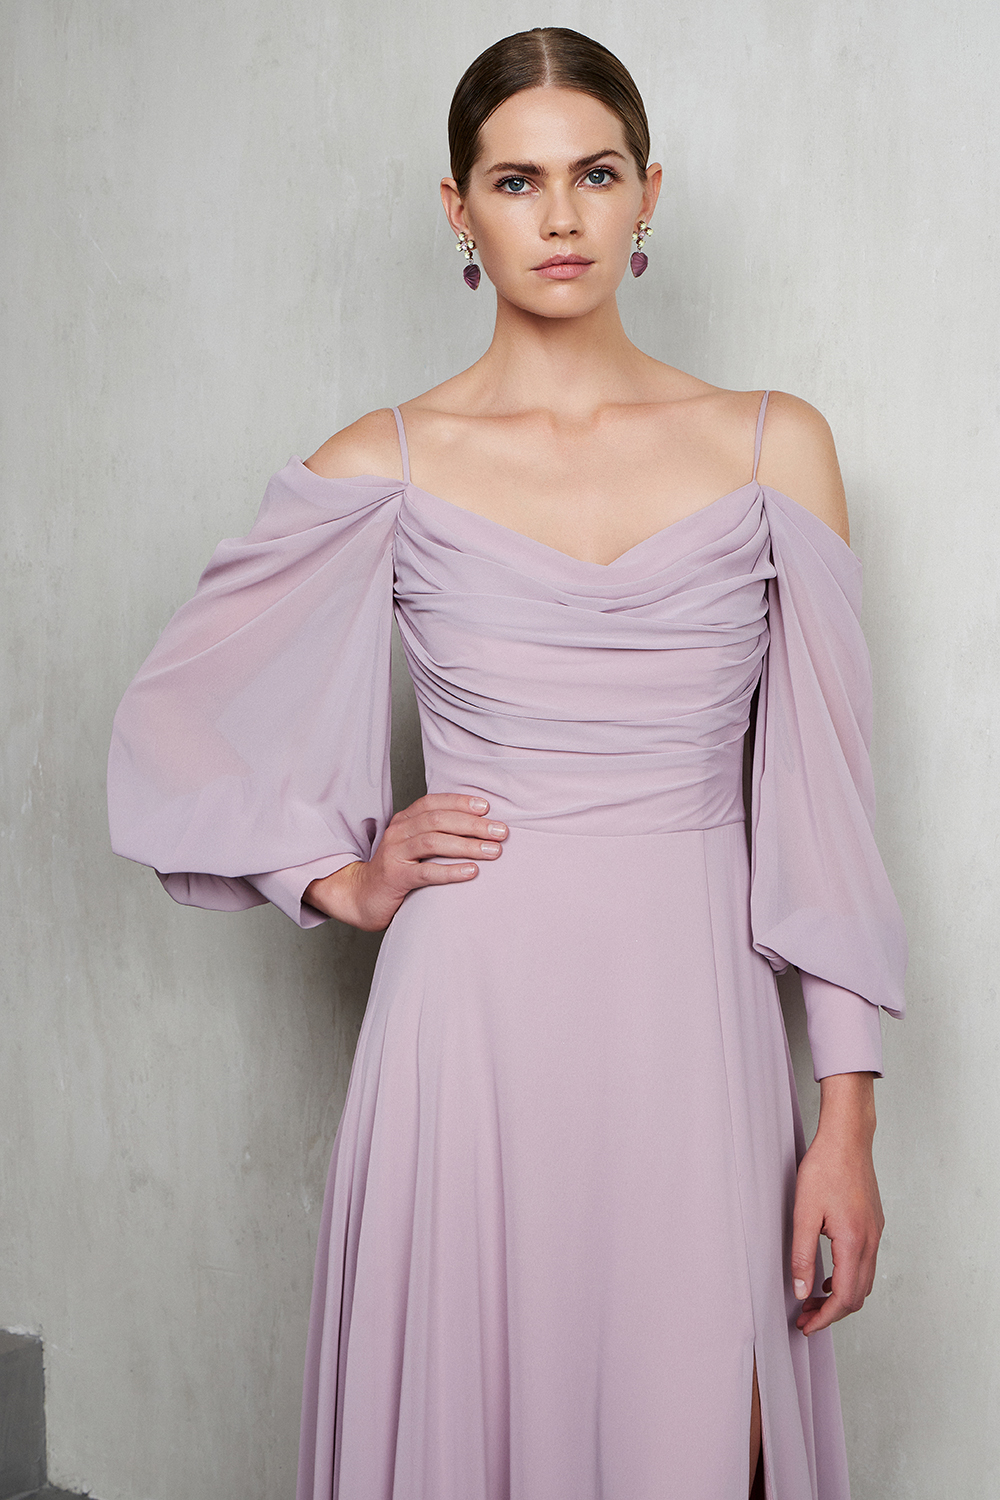 Cocktail Dresses / Long cocktail dress with chiffon fabric and long sleeves